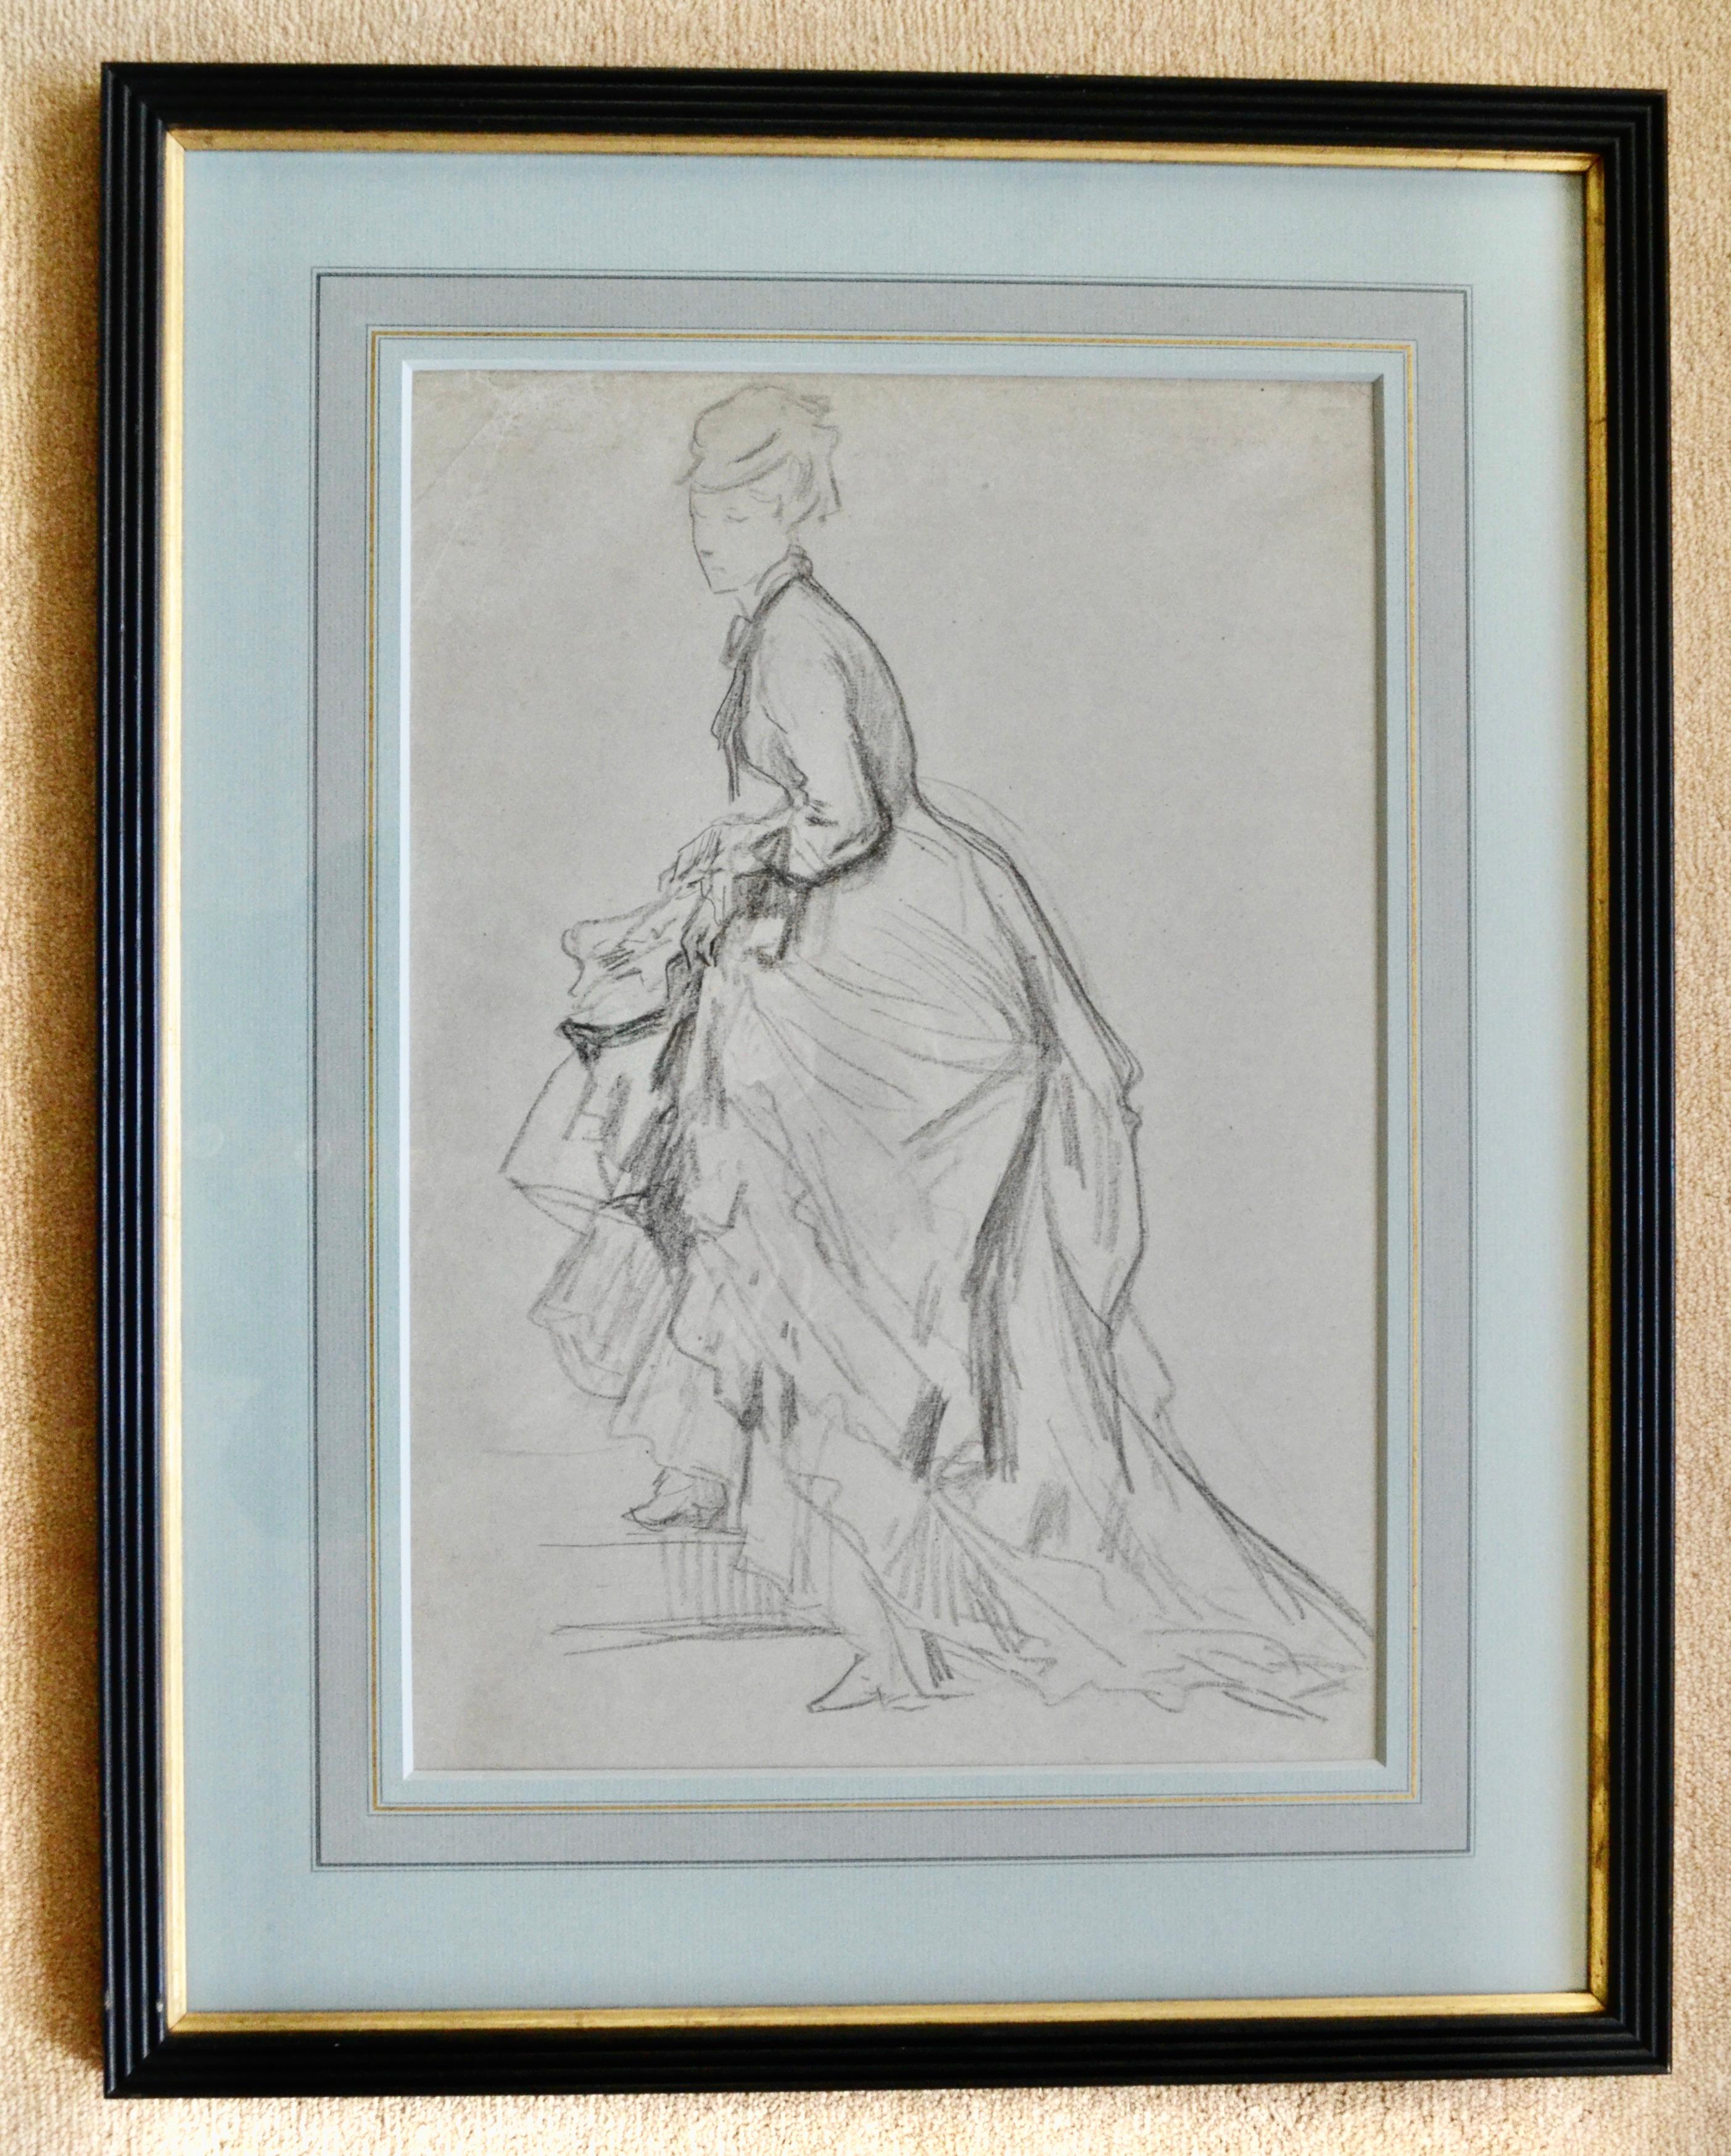 Showing an Ankle - 19th Century French drawing of a Fashionable Lady - Art by Unknown